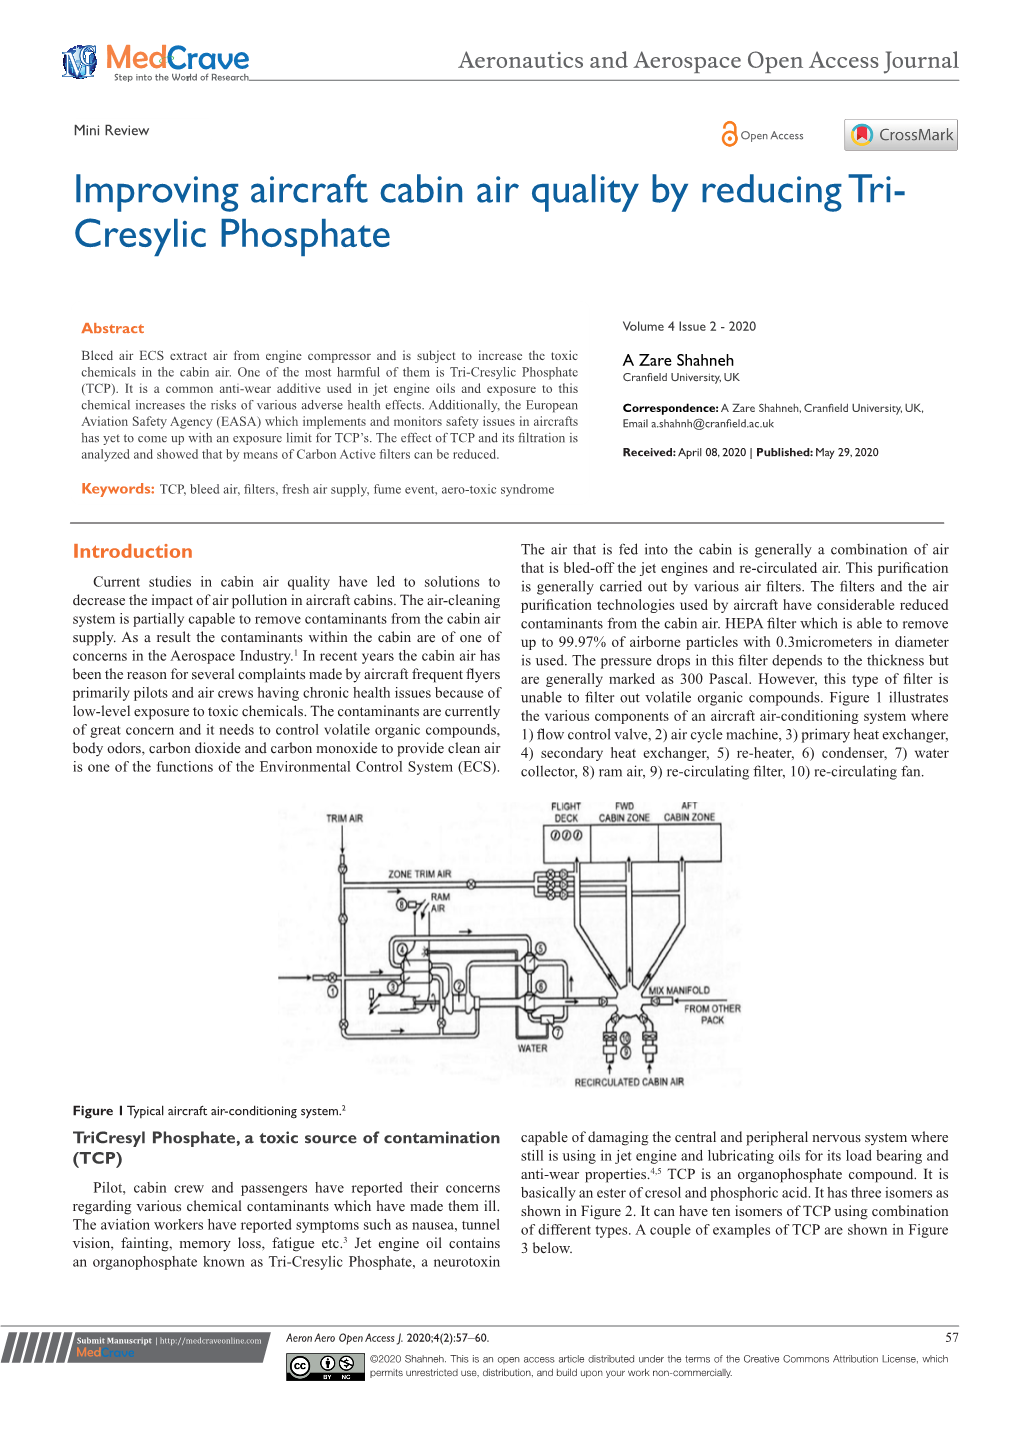 Improving Aircraft Cabin Air Quality by Reducing Tri-Cresylic Phosphate ©2020 Shahneh 58